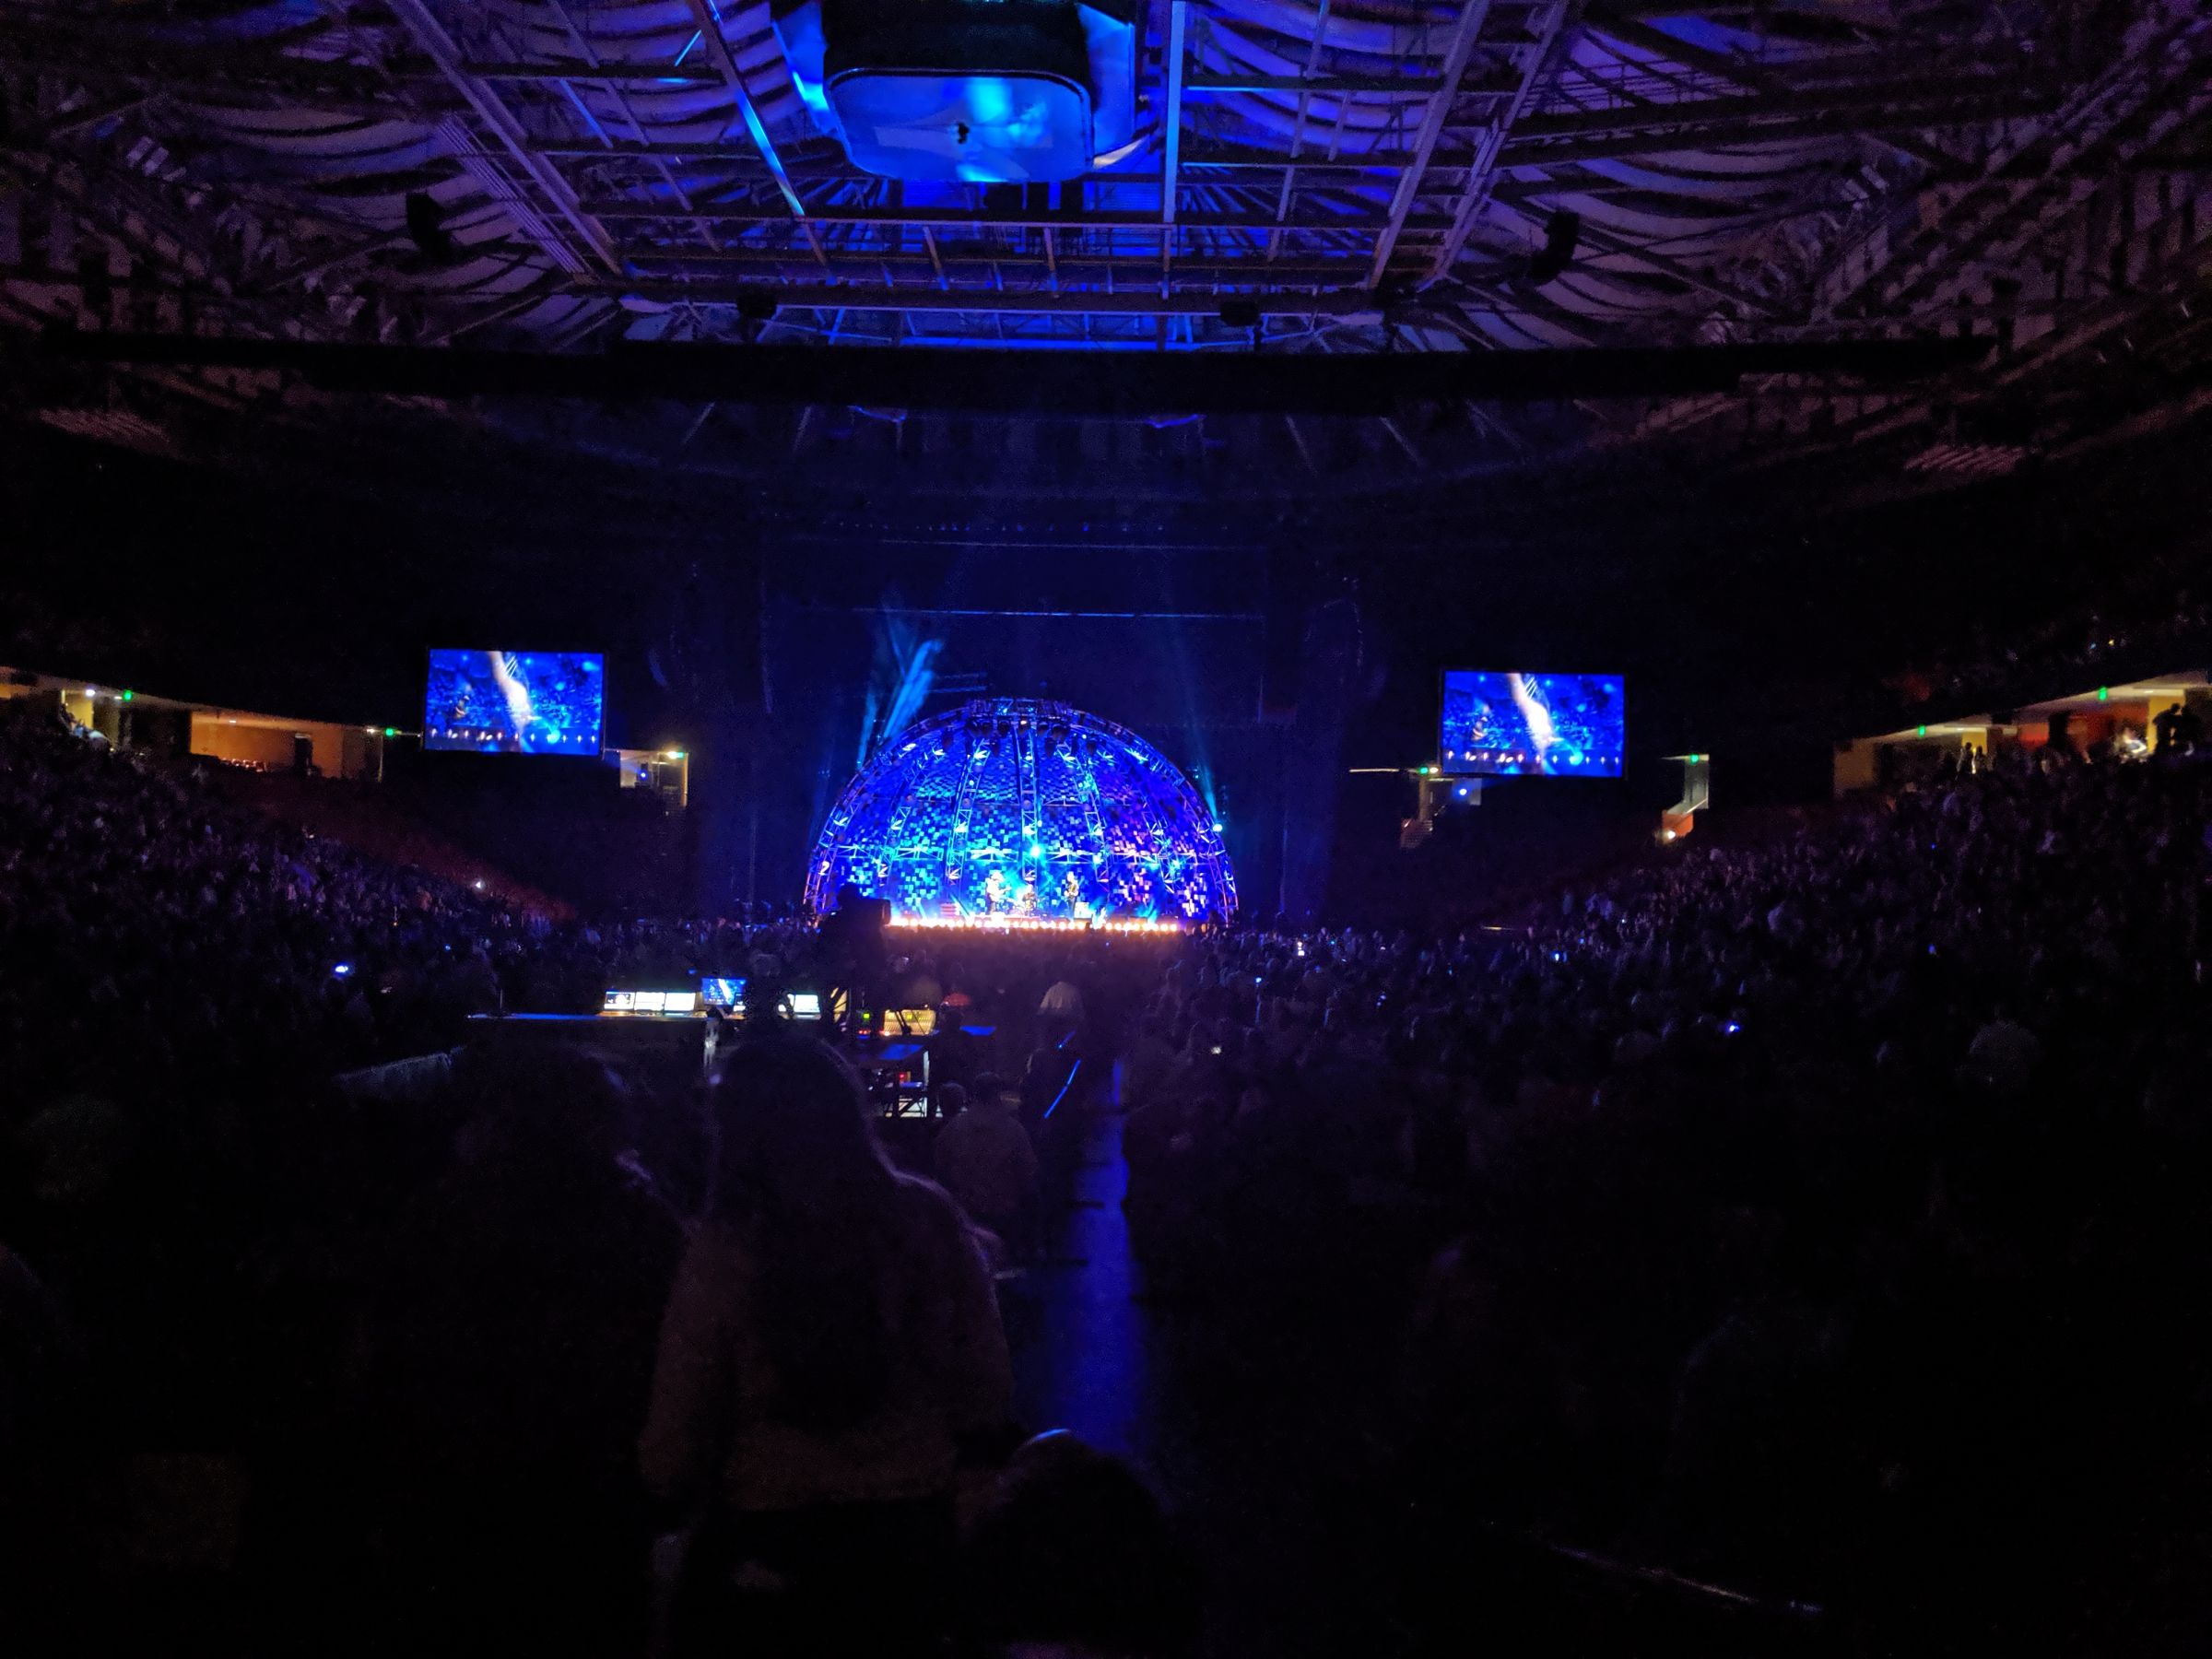 head-on concert view at Bon Secours Wellness Arena